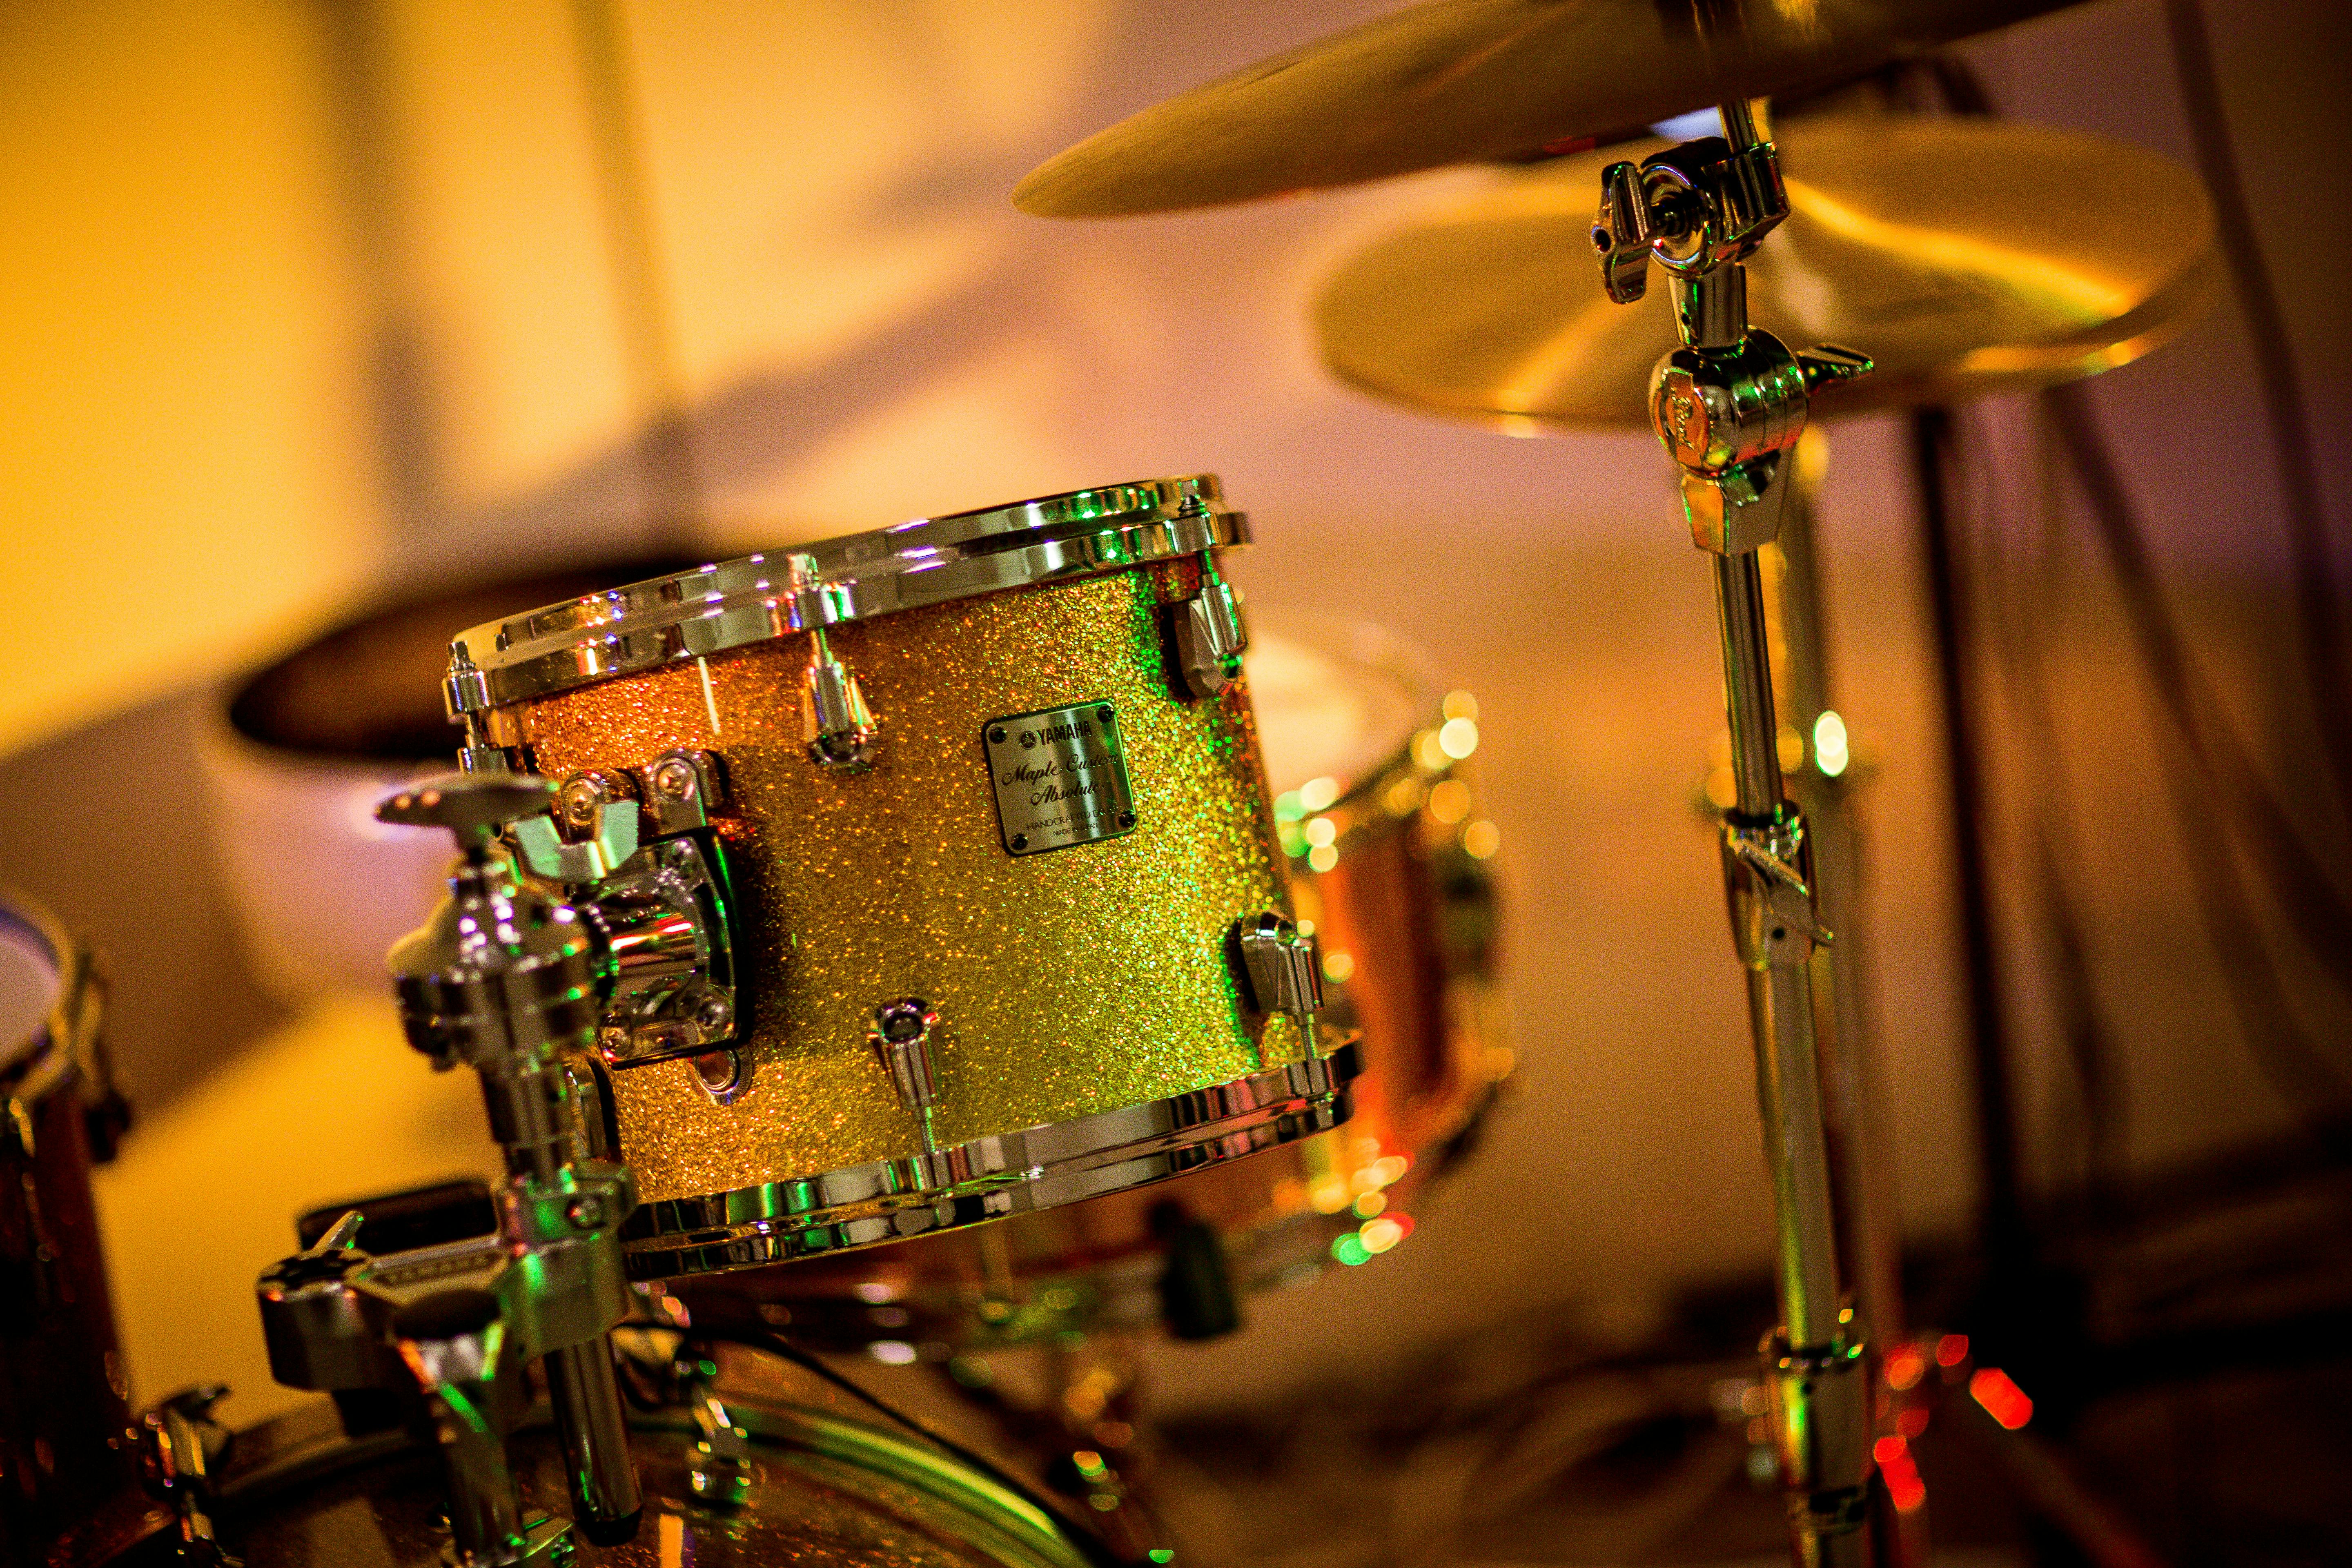 Free Brass Drums Stock Photo